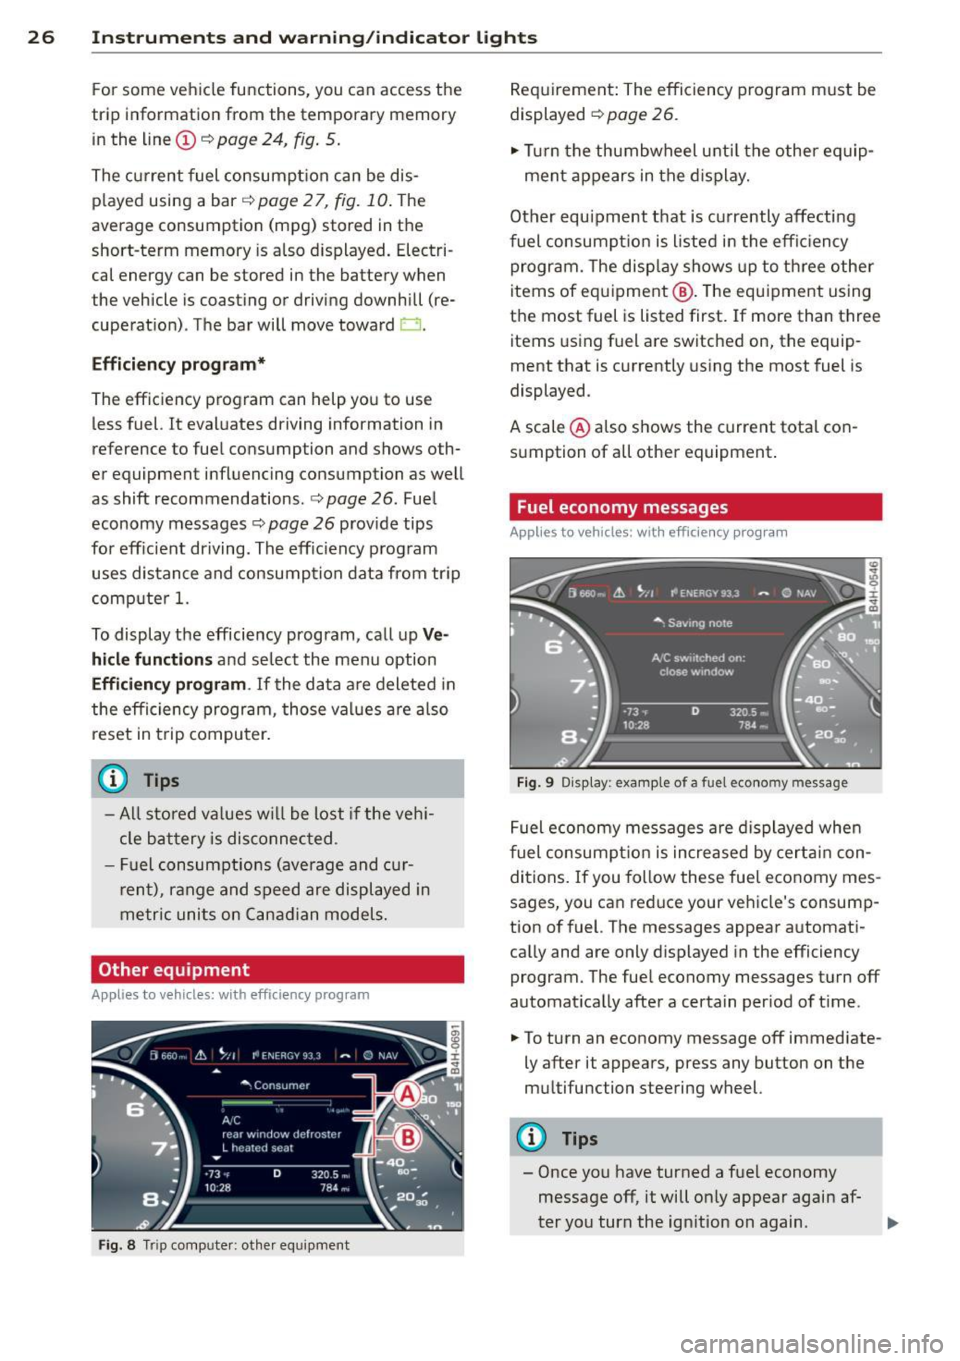 AUDI S8 2014 Owners Manual 26  Instruments  and  warning/indicator  lights 
For  some  vehicle  functions,  you  can  access  the 
trip  information  from  the  t emporary  memory 
in the  line 
(D ~ page 24, fig. 5. 
The  curr